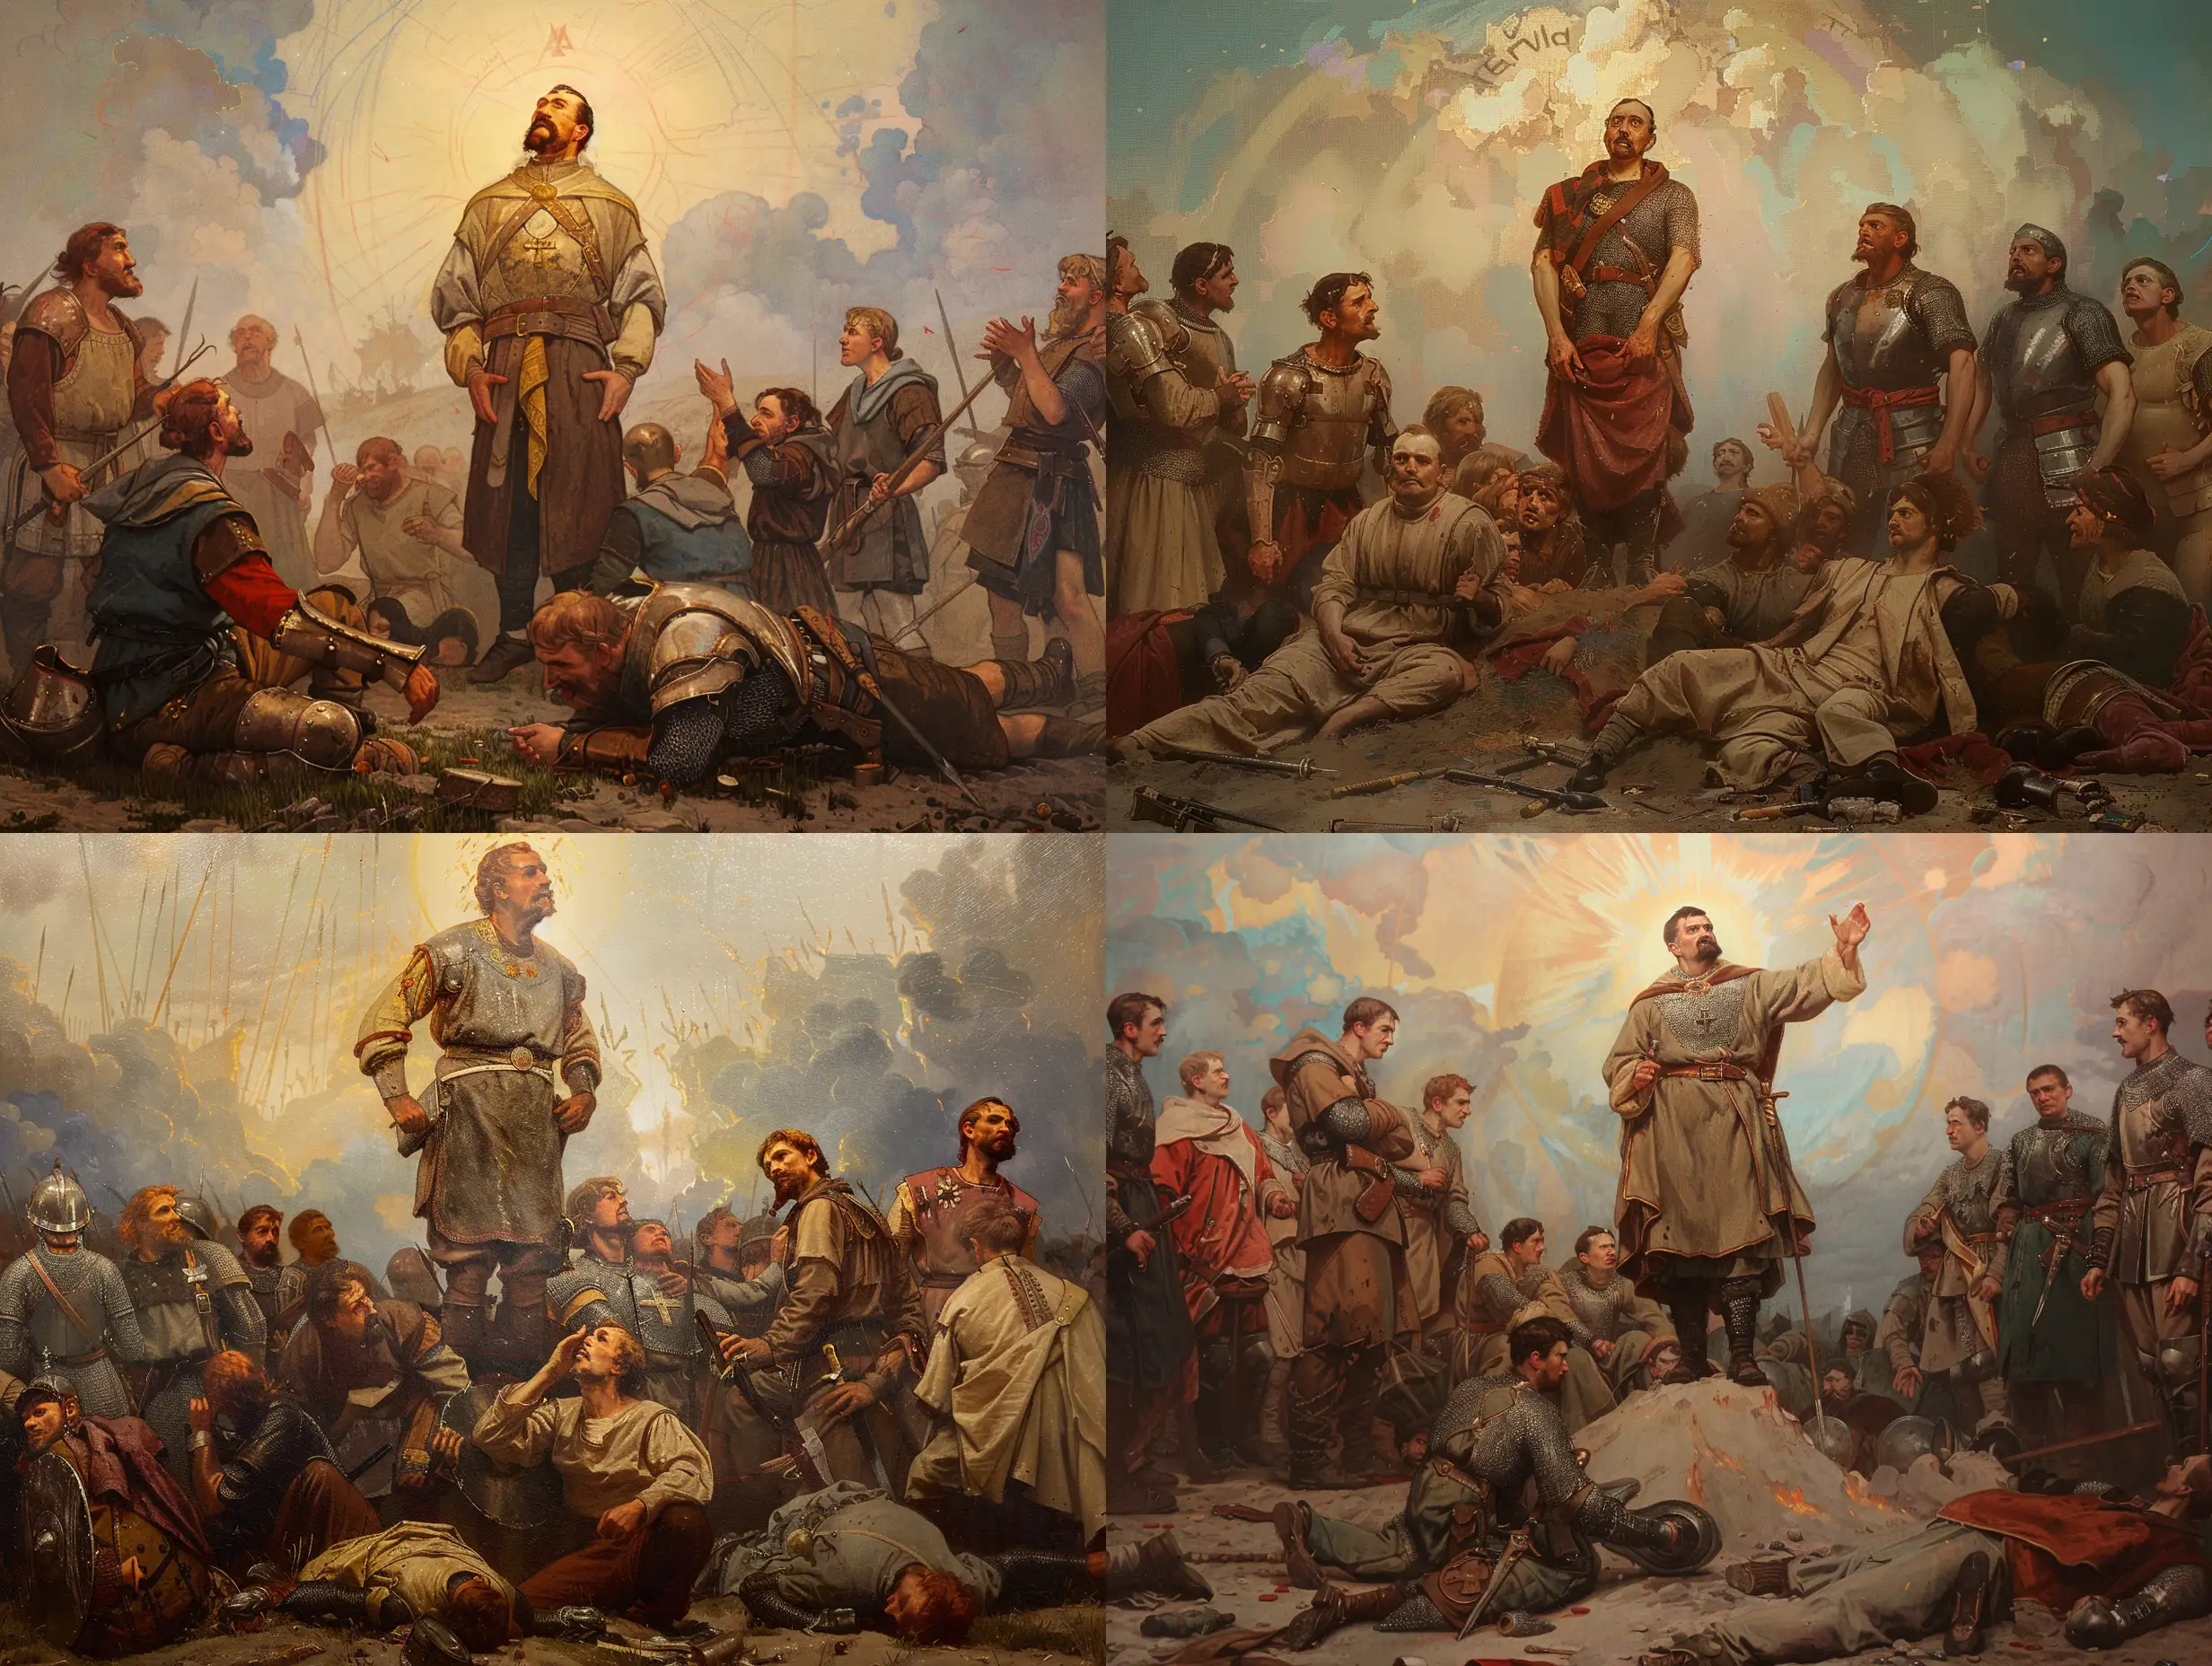 Make painting named After battle of Grunwald, inspired by Slavs Epic series of paintings of Czech painter Alfons Mucha. In "After the Battle of Grunwald" by Alfons Mucha, the focal point is King Jagiello, depicted in a reflective pose, gazing skyward in gratitude towards a divine light that suggests the presence of the Virgin Mary. This central figure is elevated, symbolizing his leadership and spiritual devotion amidst the aftermath of victory. Surrounding him, the allied Polish-Lithuanian warriors express relief and exhaustion, their postures and expressions conveying the weight of battle. They are dressed in period armor, some engaging in prayer or tending to the wounded, highlighting the human aspect of warfare.

The defeated Teutonic Knights are portrayed on the ground, emphasizing their loss and the battle's brutality. The background features a tumultuous sky, reflecting the chaos of war, and the landscape is littered with the fallen, underscoring the battle's severity.

Mucha's use of dramatic lighting focuses on Jagiello, casting a divine glow over the scene, enhancing the spiritual significance of the victory. The painting is a vivid narrative of historical triumph, spiritual faith, and the stark realities of combat, rendered with detailed attention to the historical attire, emotional states of the figures, and the symbolic interplay of light and shadow.